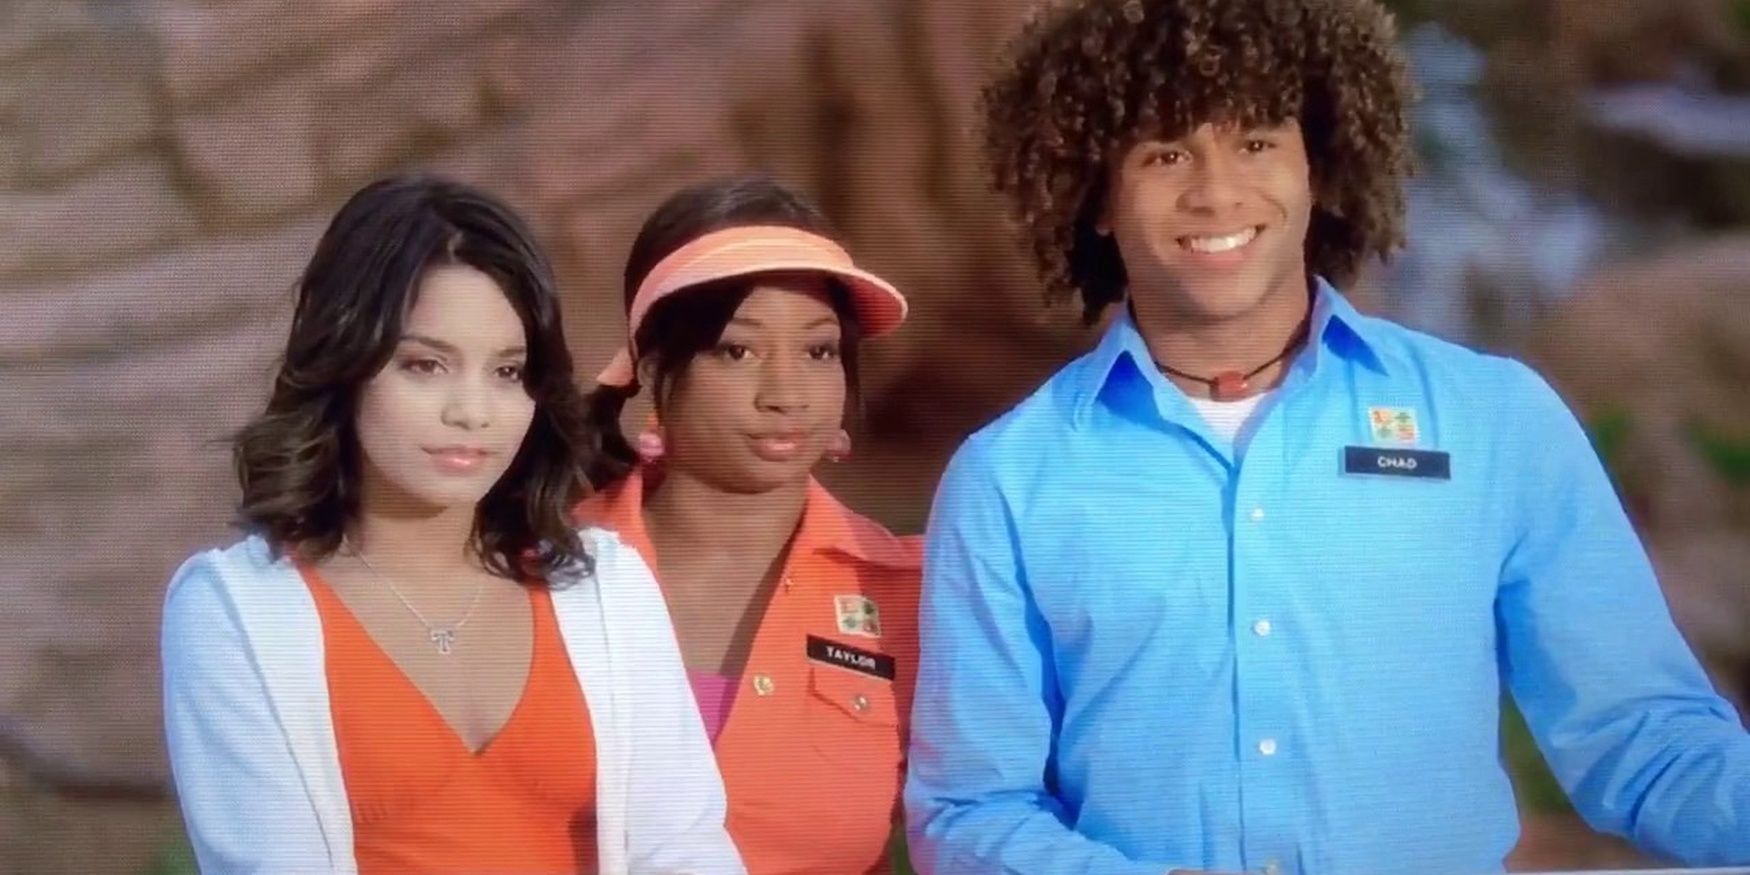 Gabriella alongside Chad and Taylor at the country club in High School Musical 2